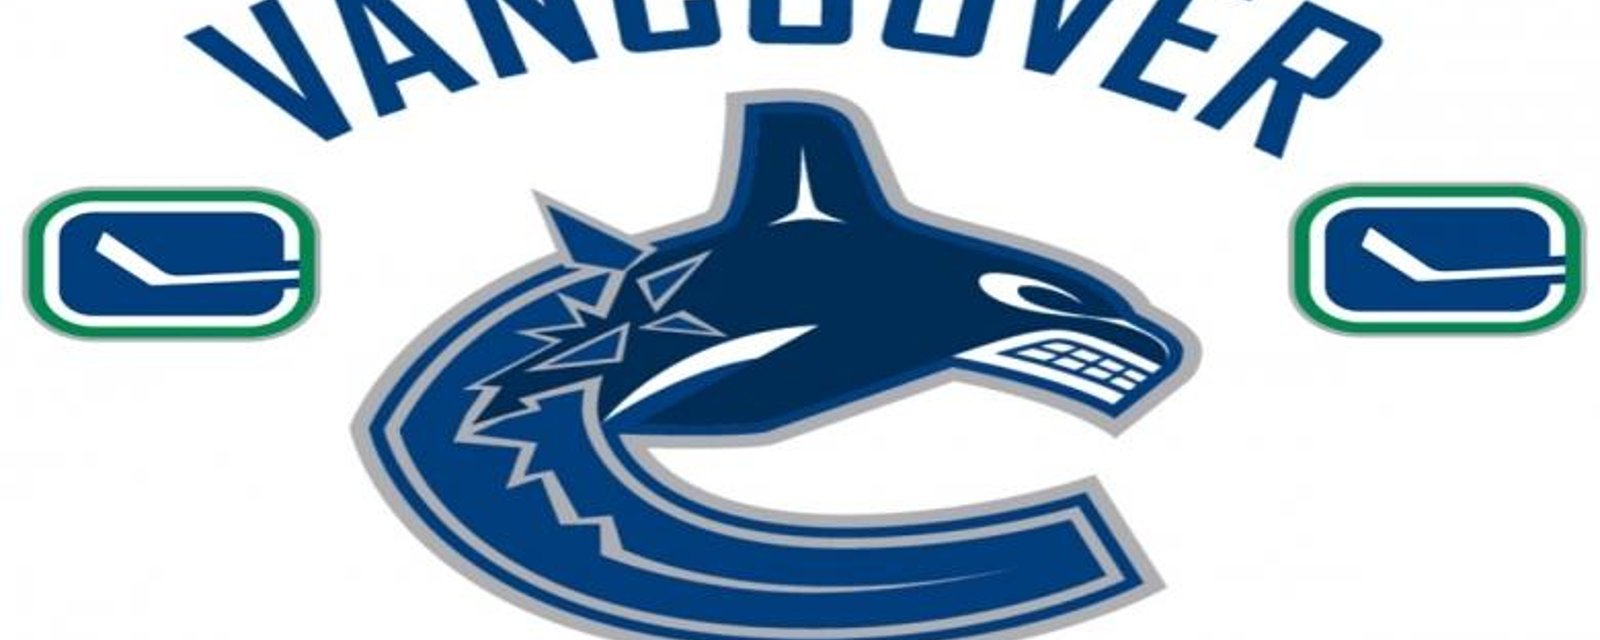 Can the Canucks once again make the playoffs?